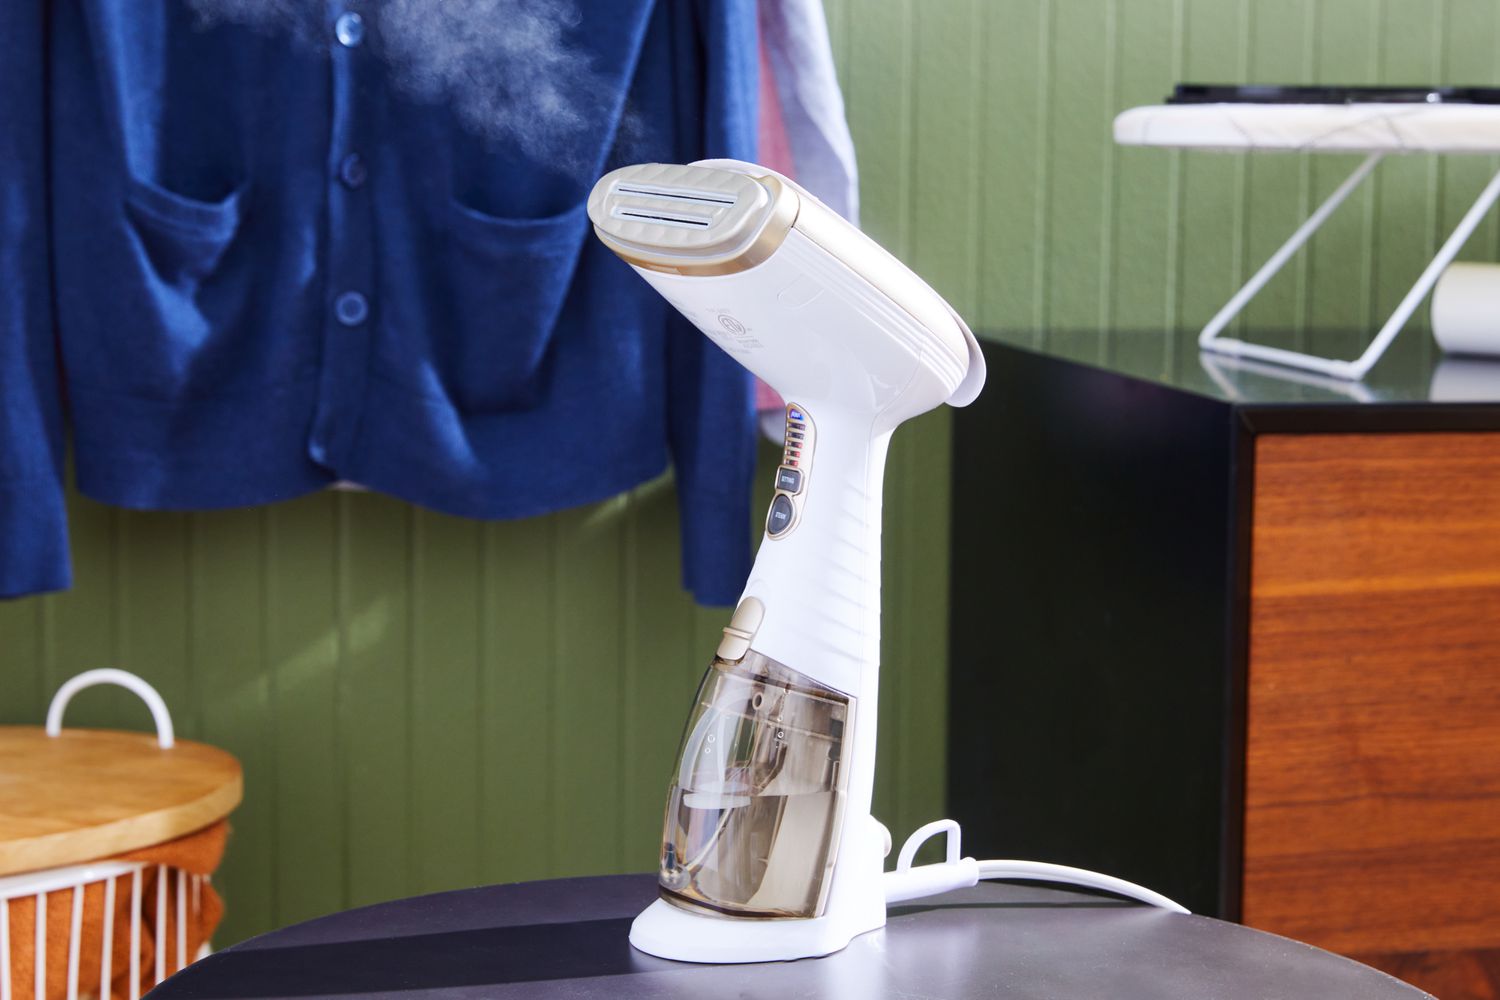 The Conair Turbo ExtremeSteam Hand-Held Fabric Steamer sitting on a table with clothes handing in the back.